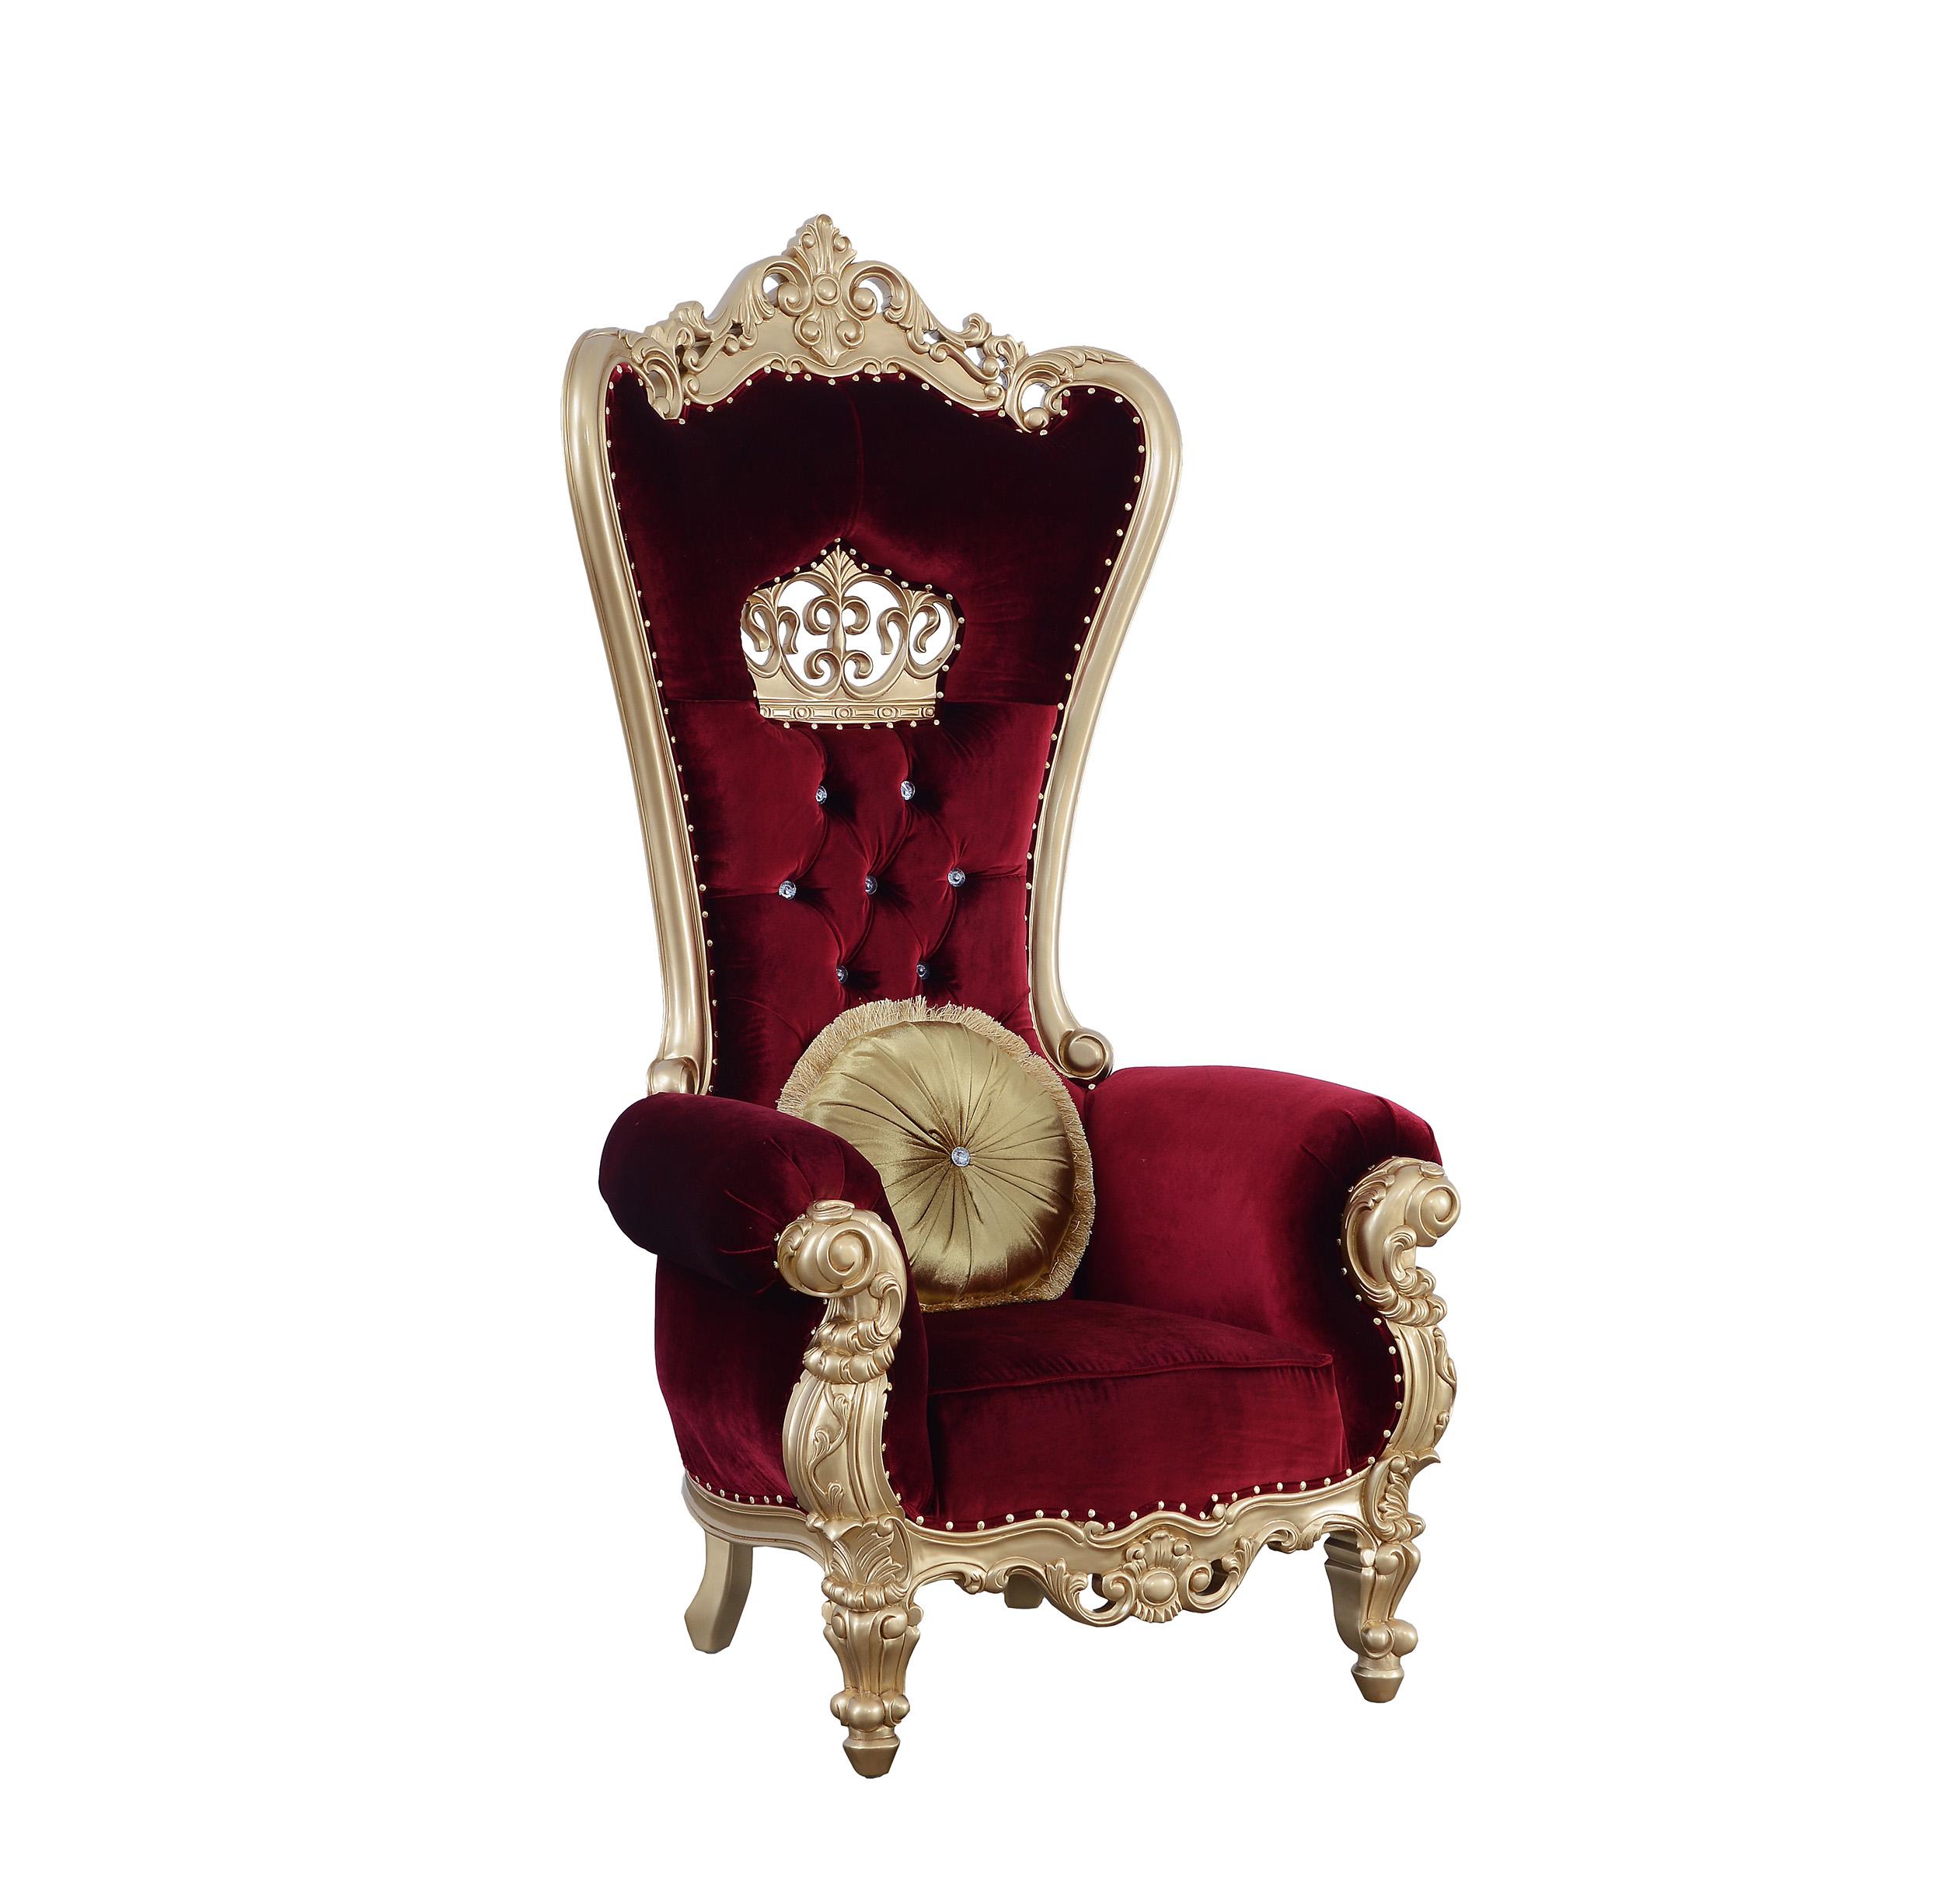 Classic, Traditional Arm Chair QUEEN ELIZABETH 35095 in Red, Gold, Burgundy Fabric